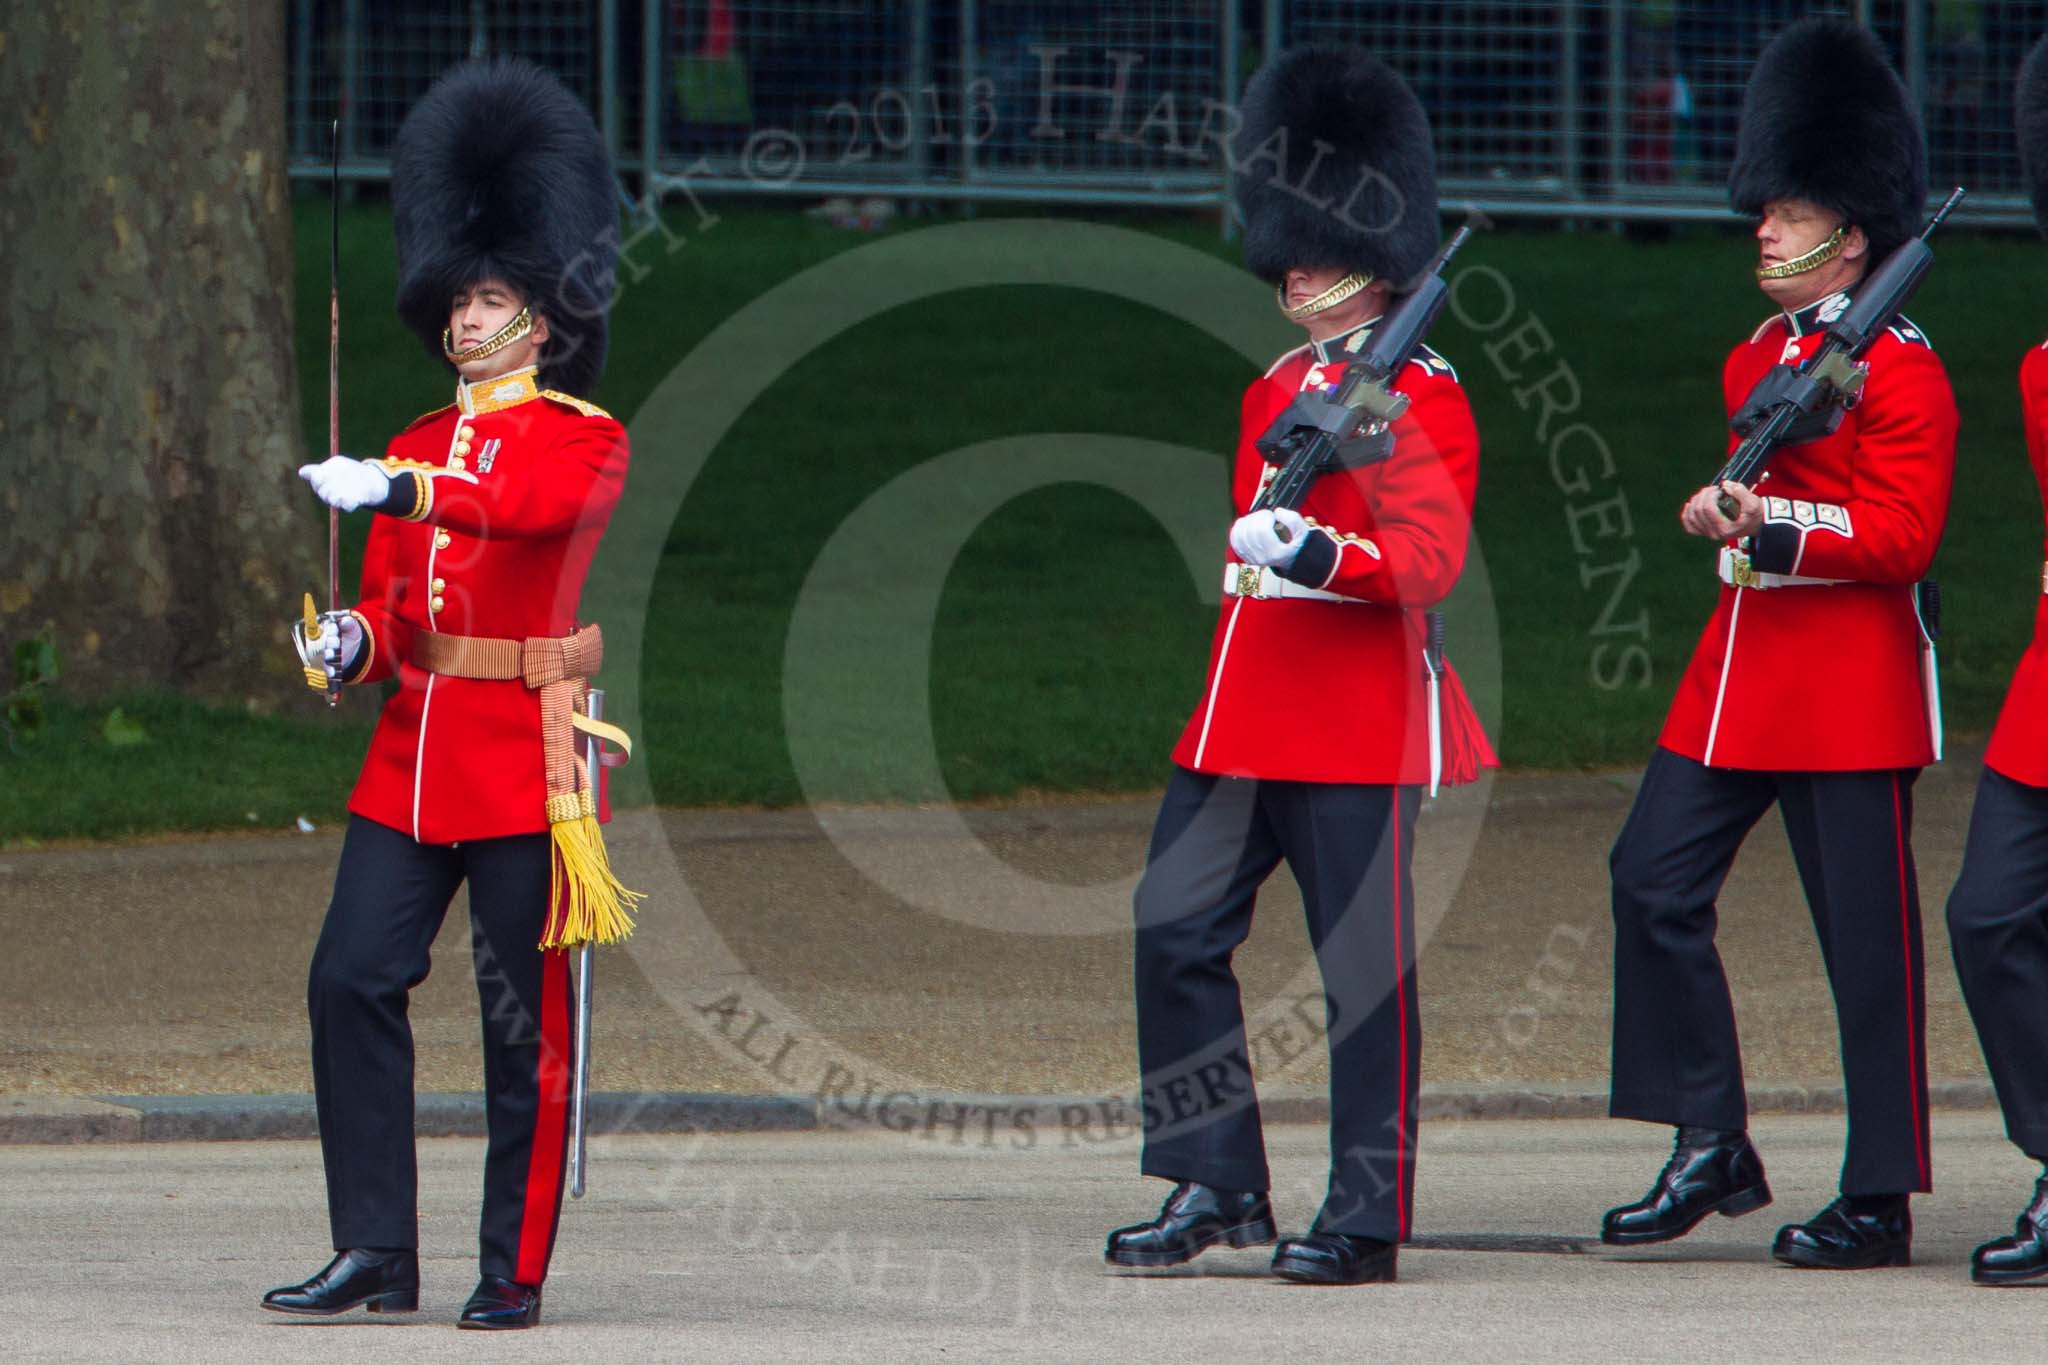 The Colonel's Review 2013: No. 5 Guard, F Company Scots Guards, is marching to their position on Horse Guards Parade..
Horse Guards Parade, Westminster,
London SW1,

United Kingdom,
on 08 June 2013 at 10:25, image #86